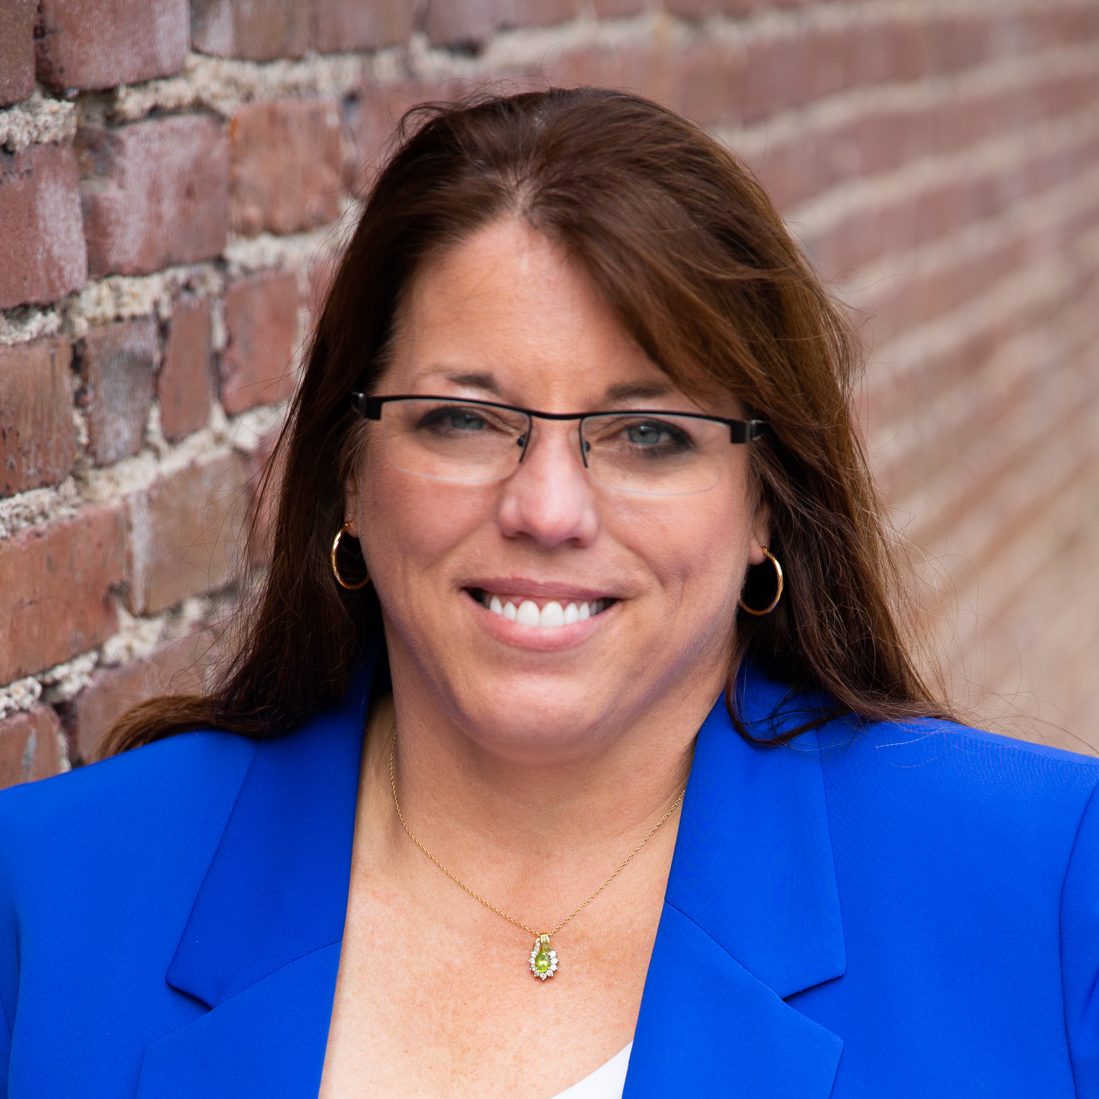 Stroud, a white woman with shoulder-length brown hair, smiles while wearing a blue blazer and black glasses.